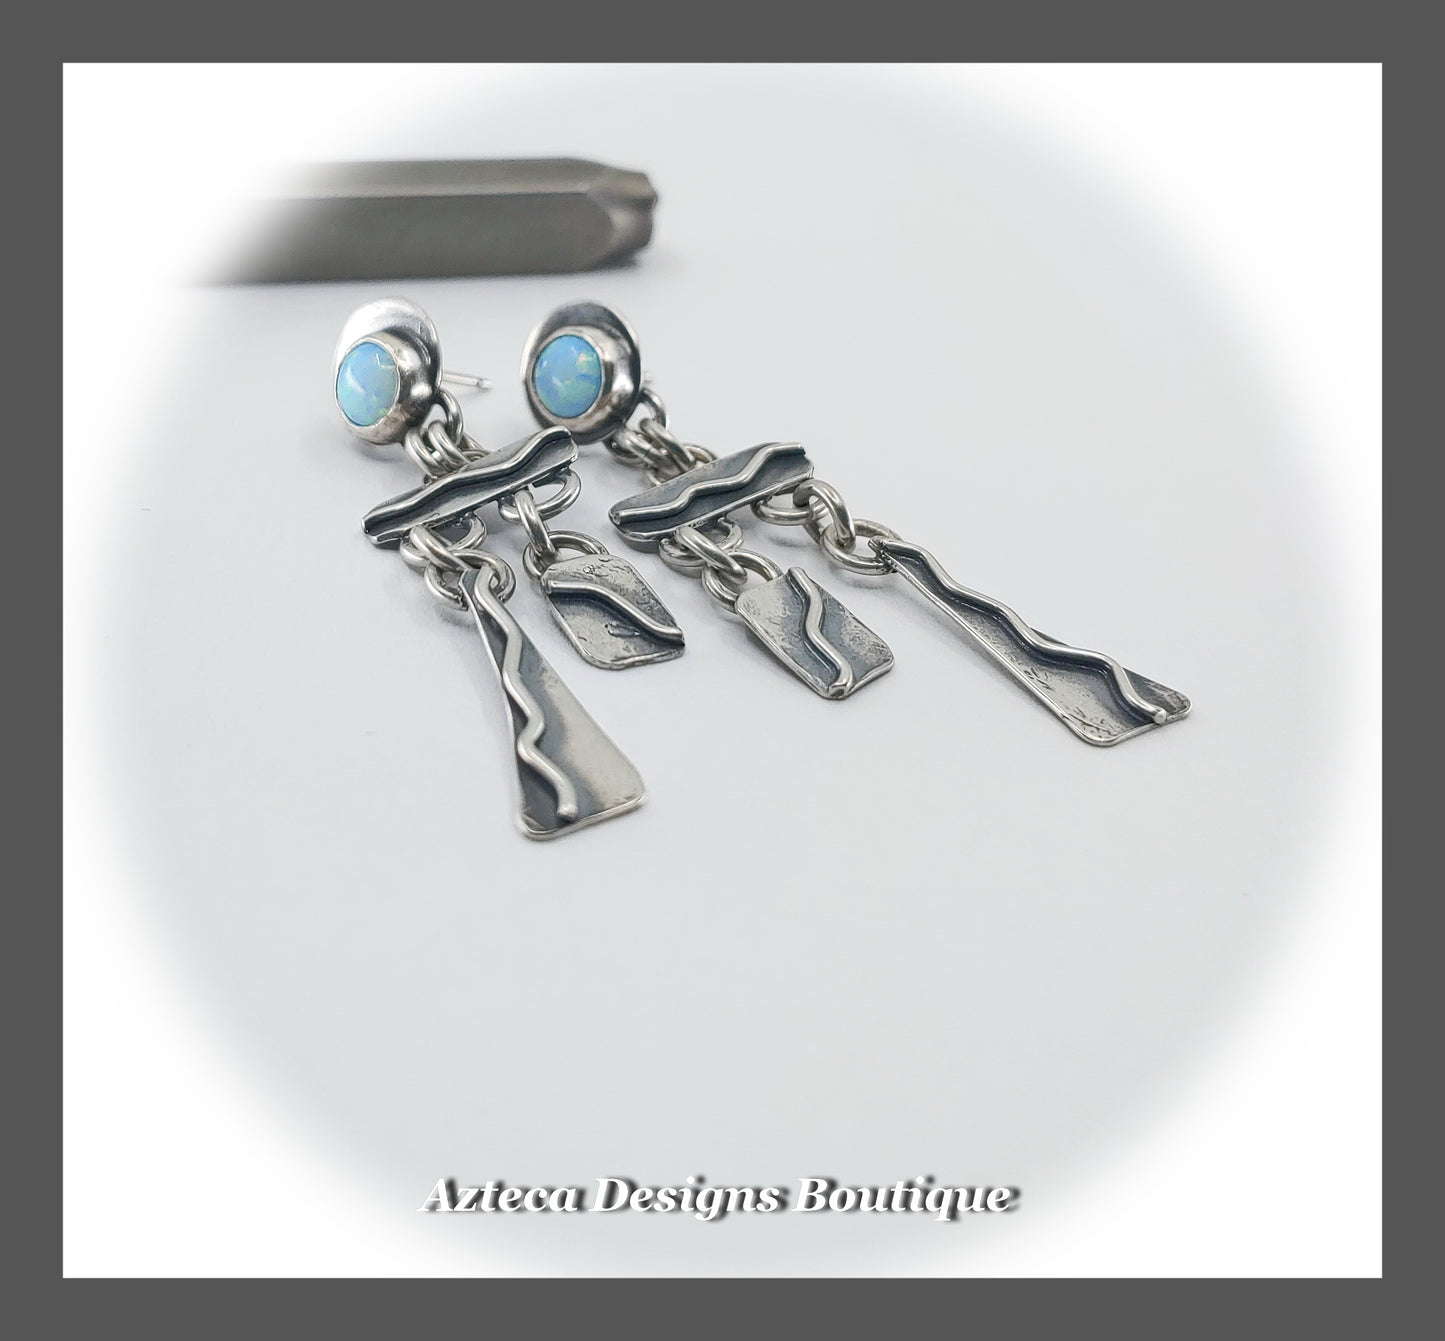 Cultured Sterling Opal + Sterling Silver Hand Fabricated Swingy Post Earrings